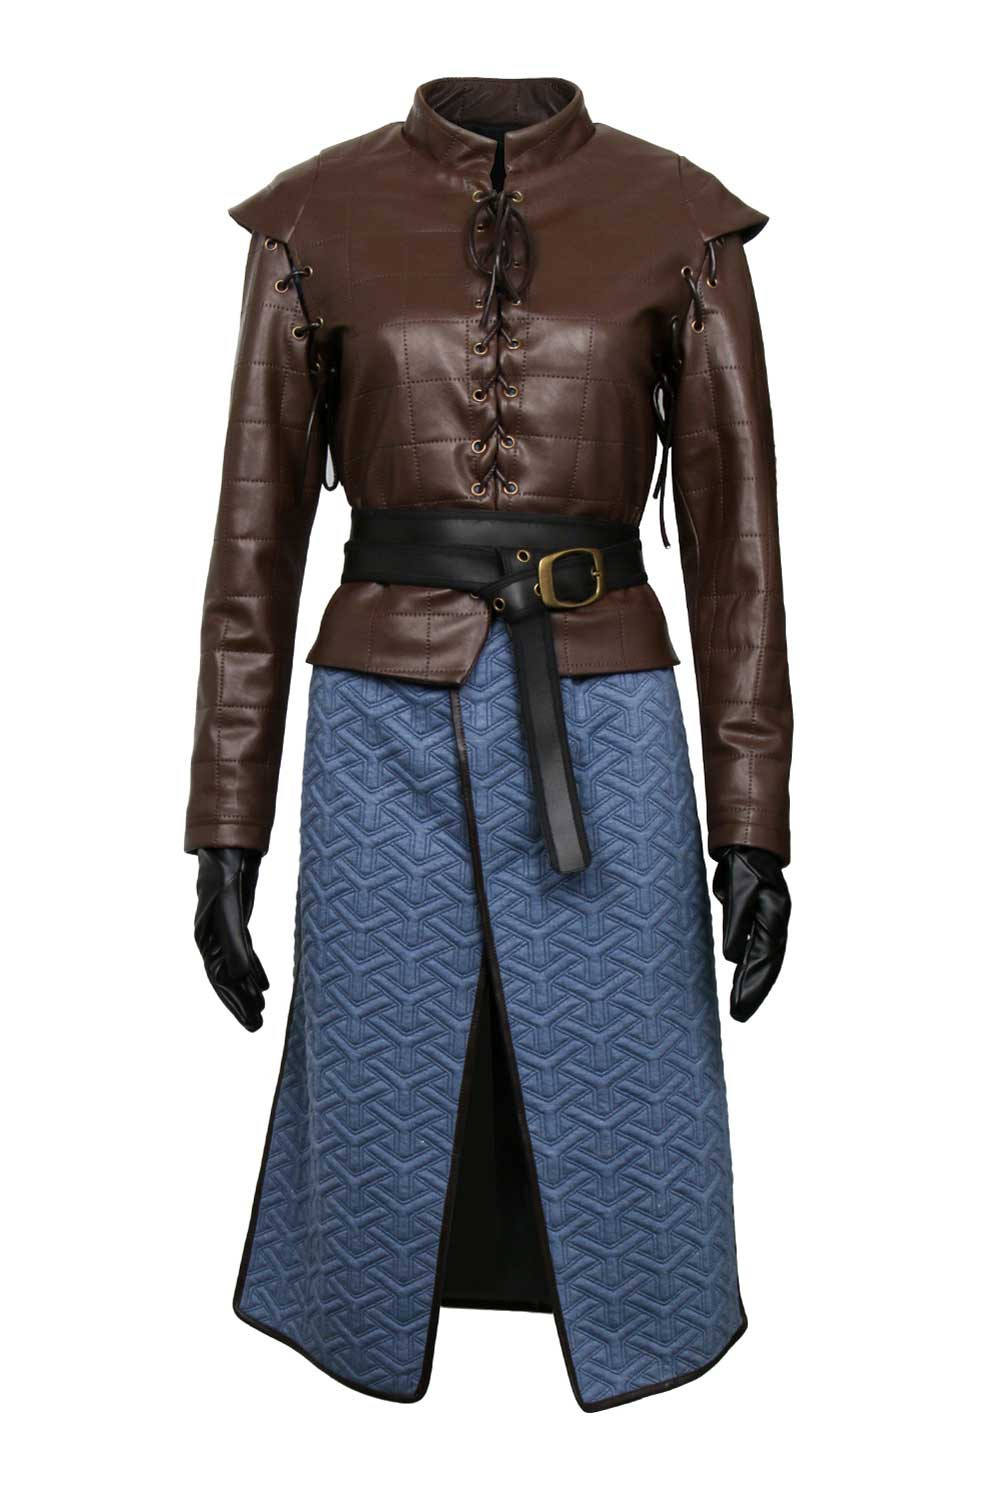 Game Of Thrones 8 Arya Stark Cosplay Costume Full Set Outfits